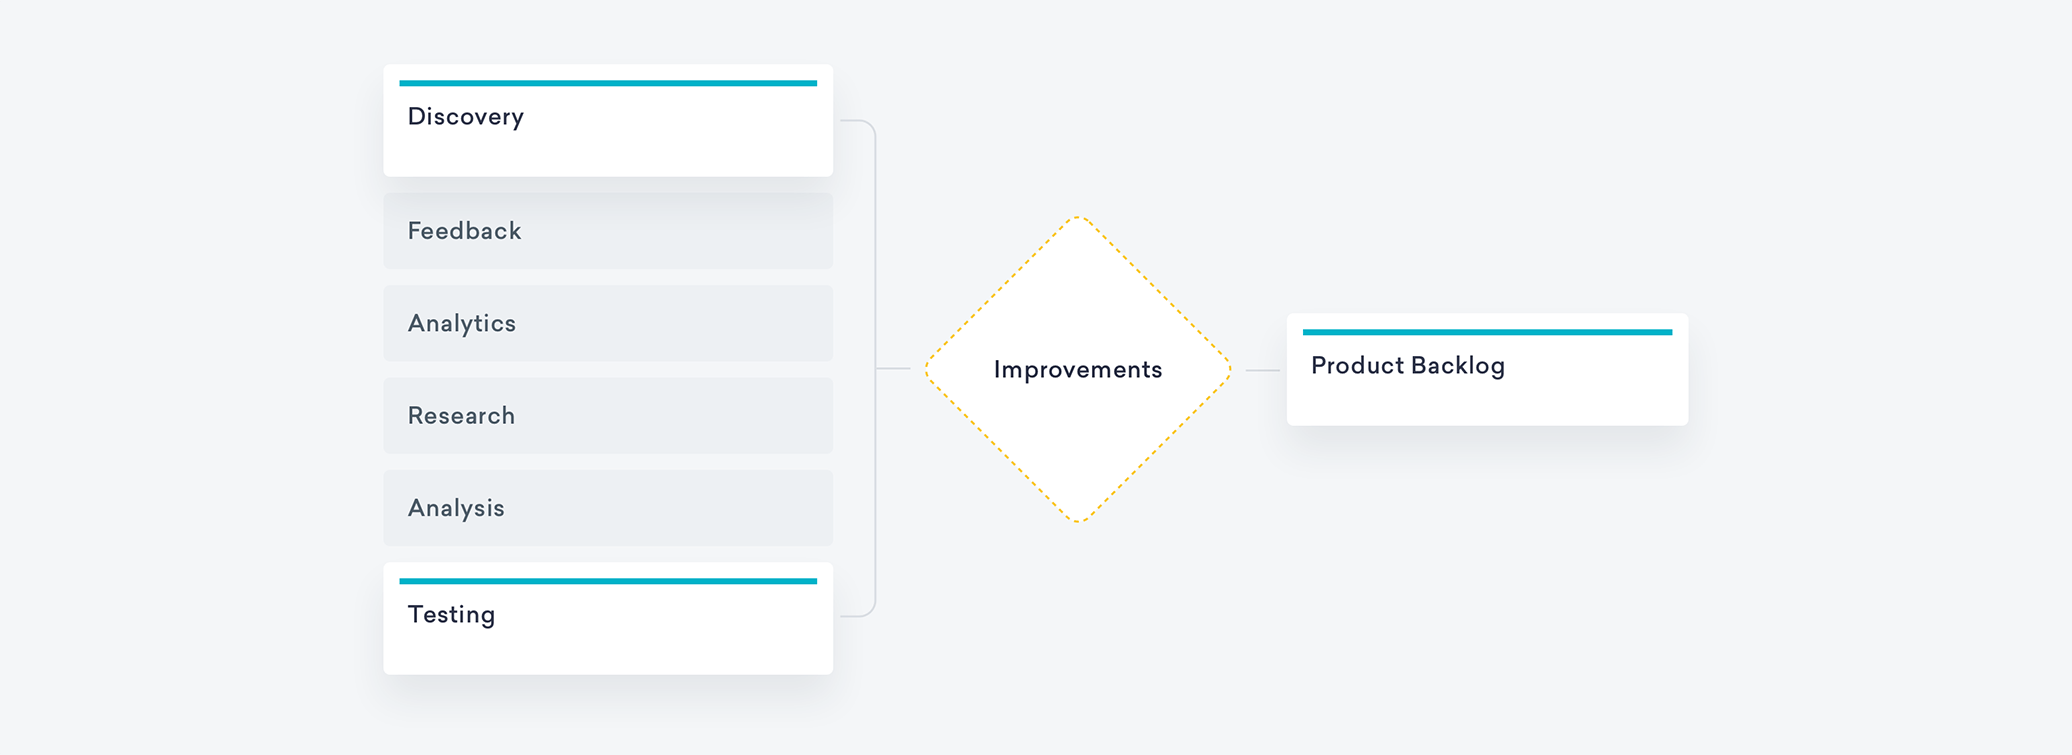 Improve an existing product